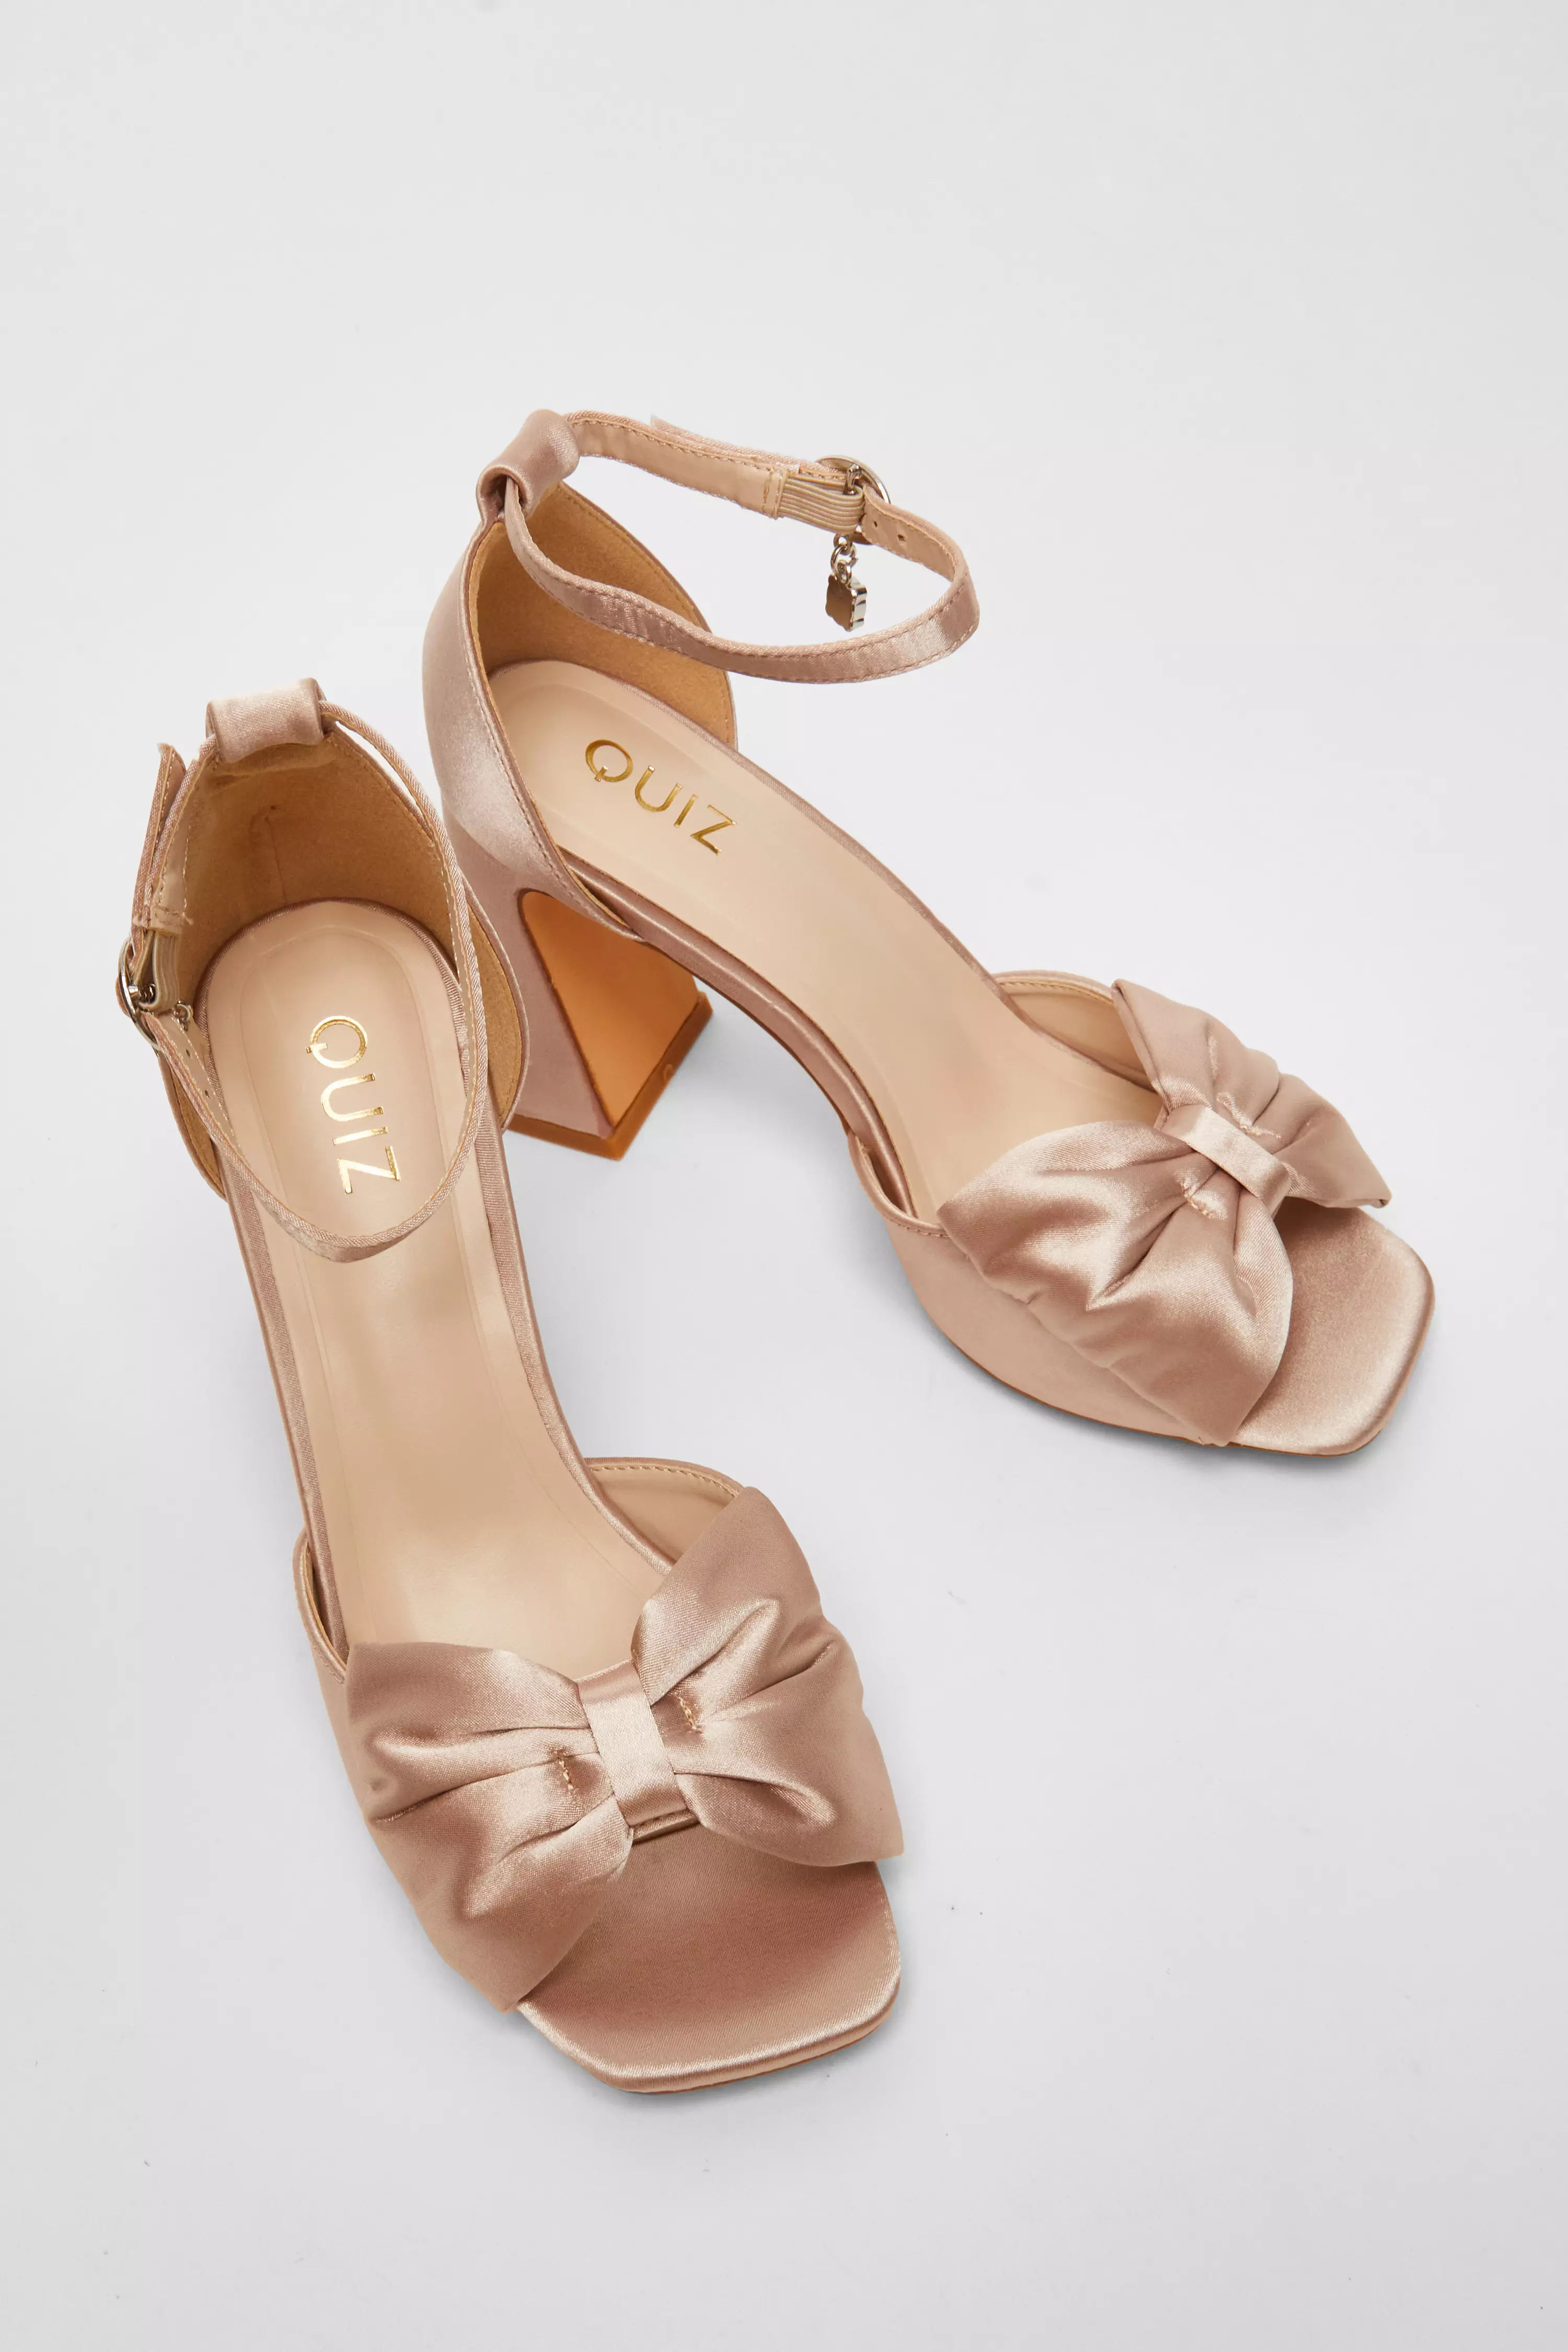 Champagne Satin Bow Heeled Sandals